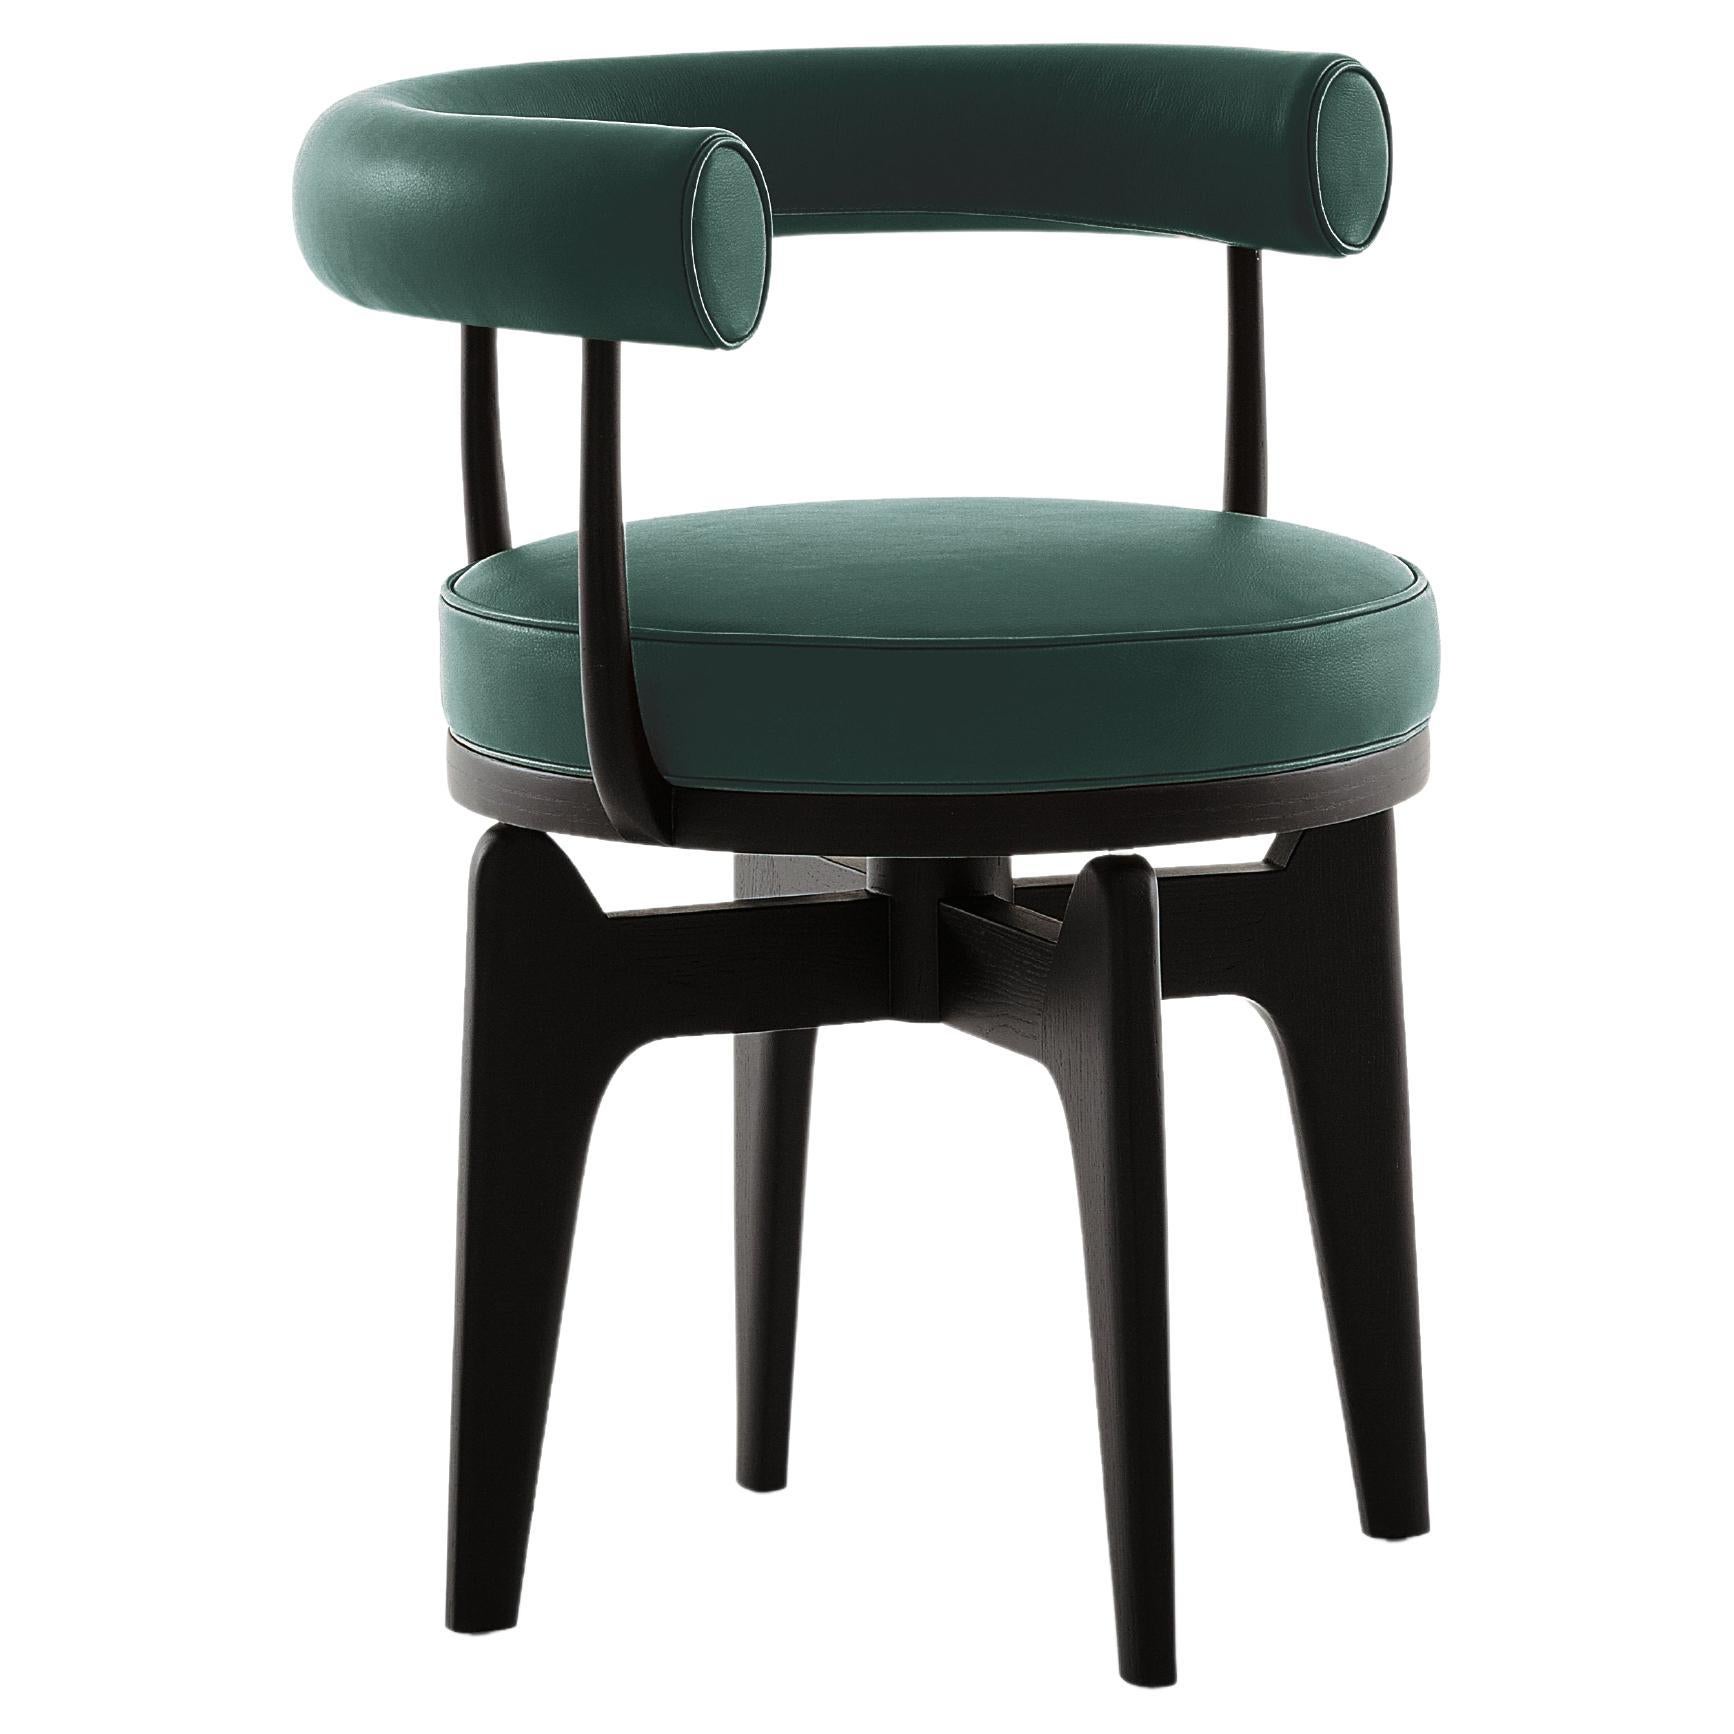 Charlotte Perriand Fauteuil Indochine en vente